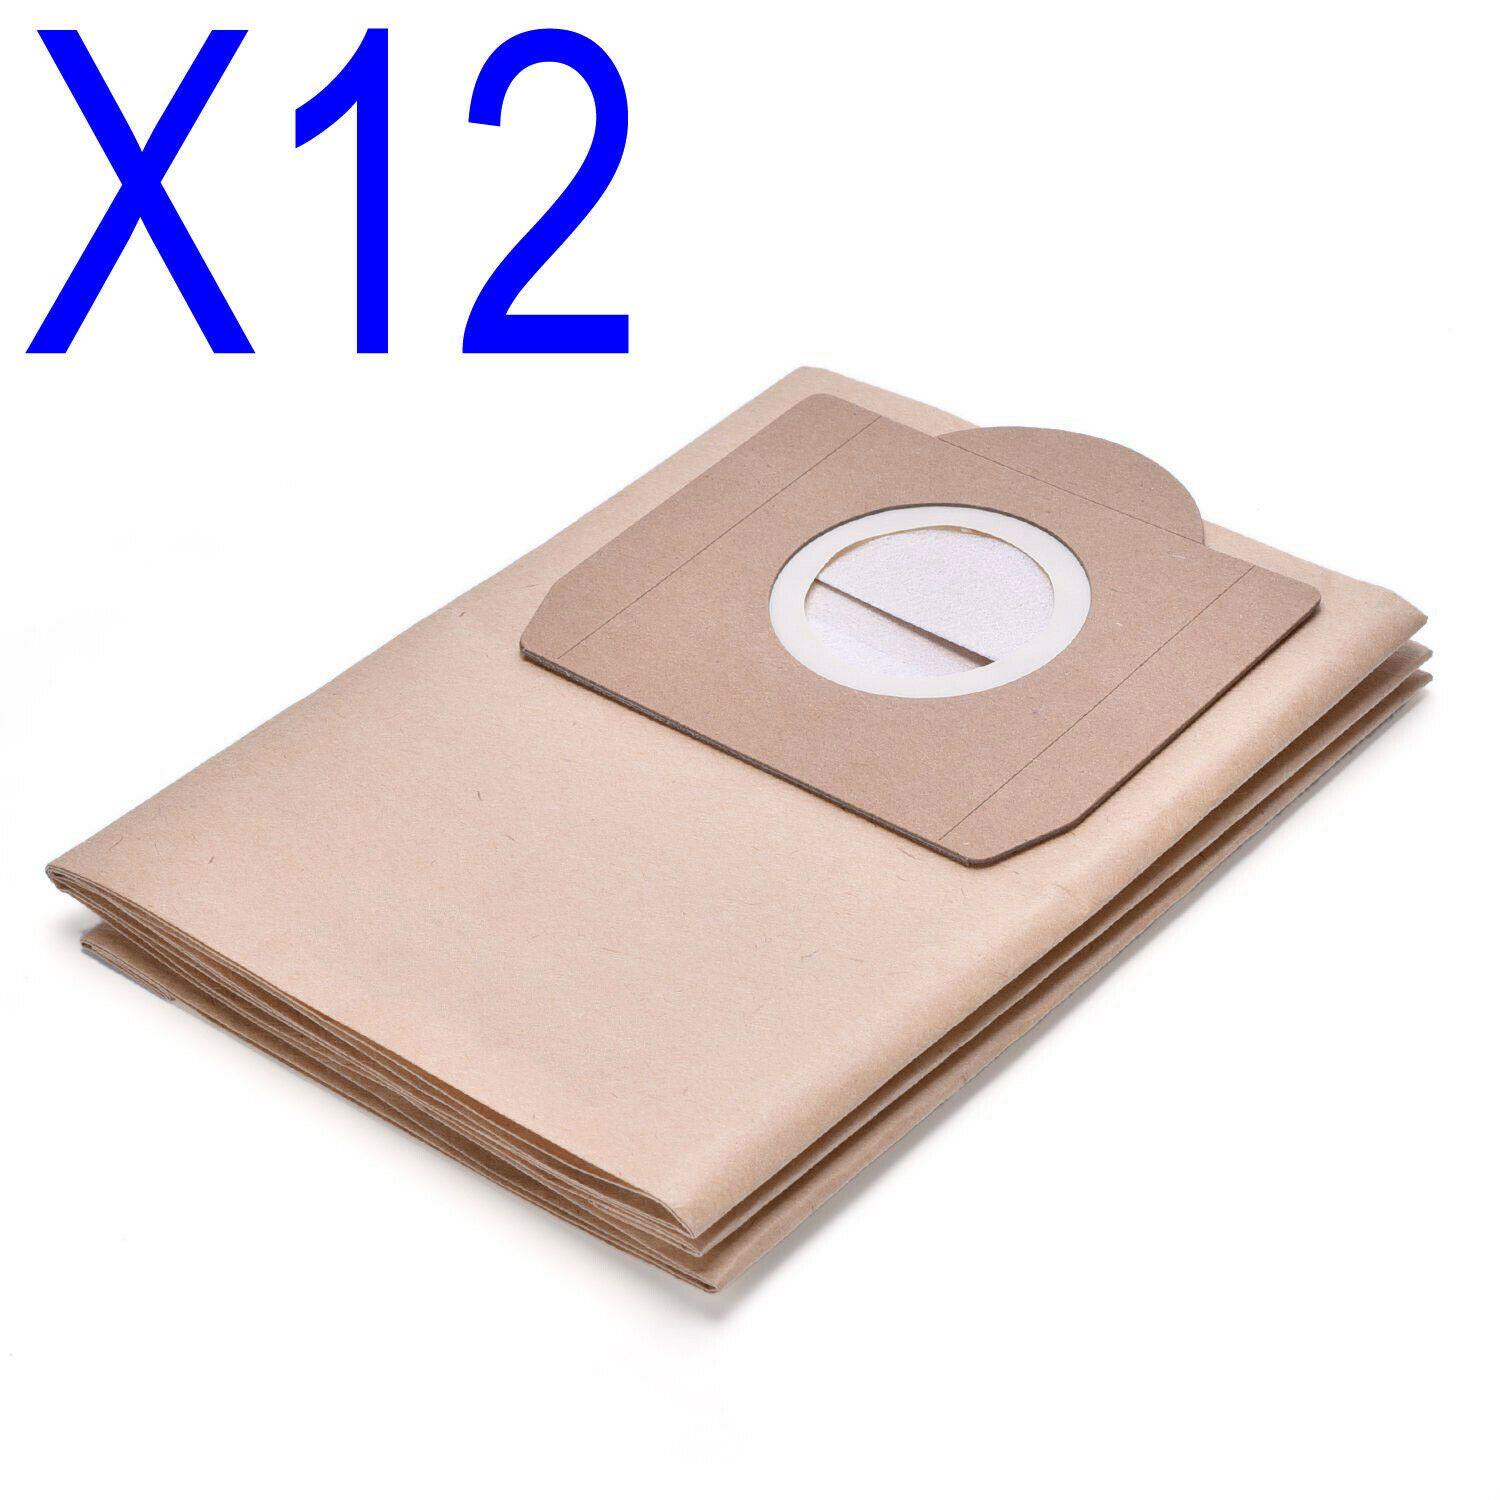 12x Paper Bags for Karcher WD 3300 M 16296680 16296510 16296550 Sparesbarn